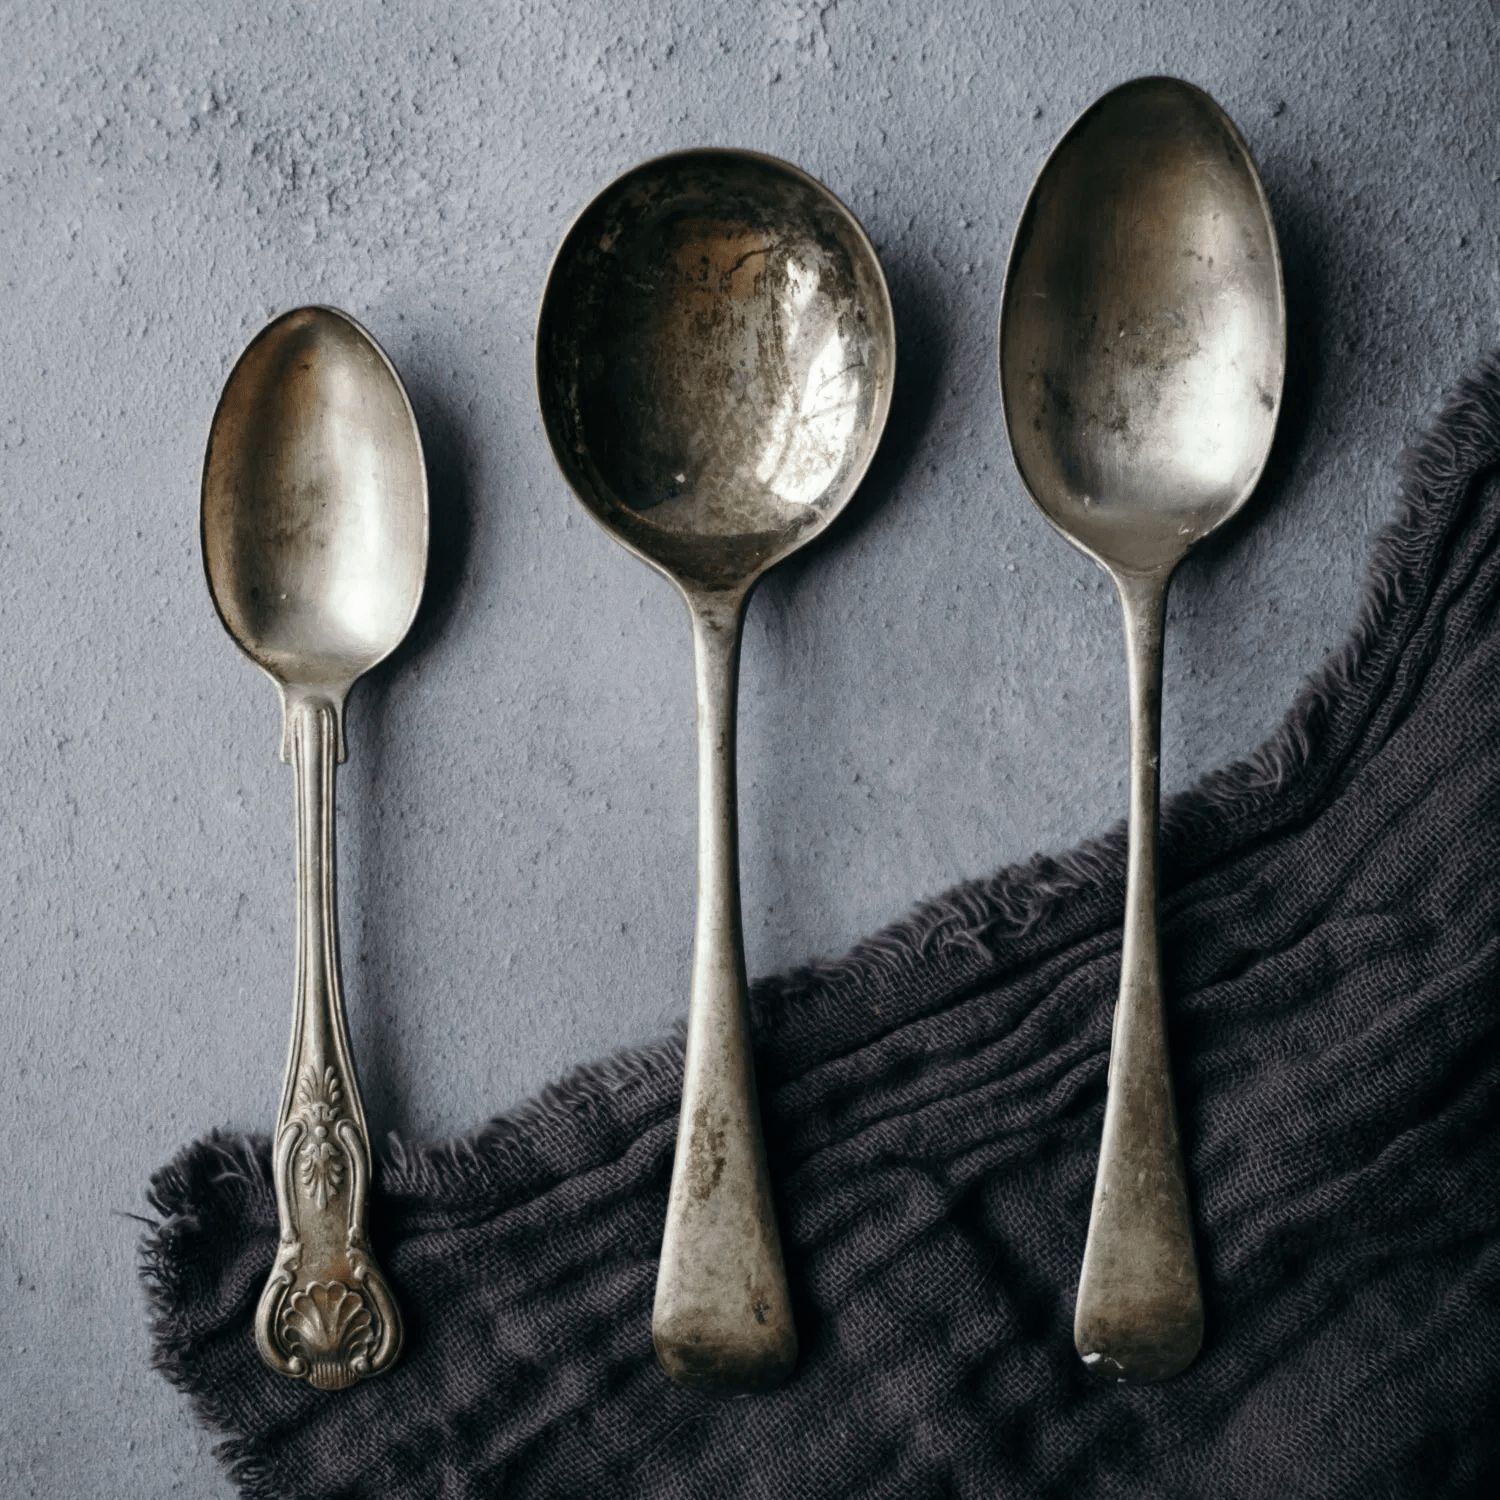 Picture of 3 antique spoons placed on the floor